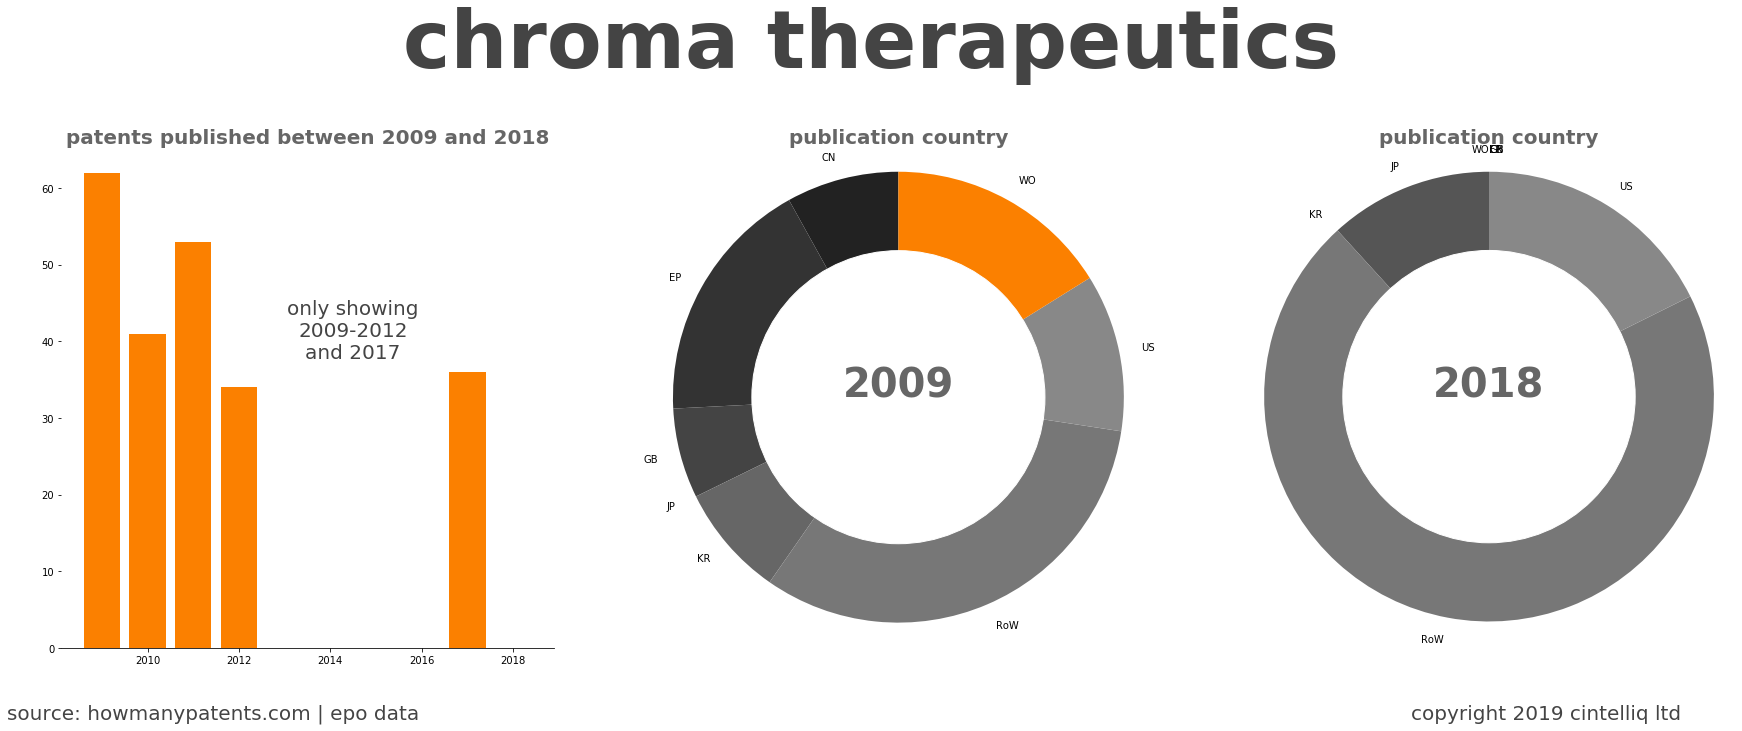 summary of patents for Chroma Therapeutics